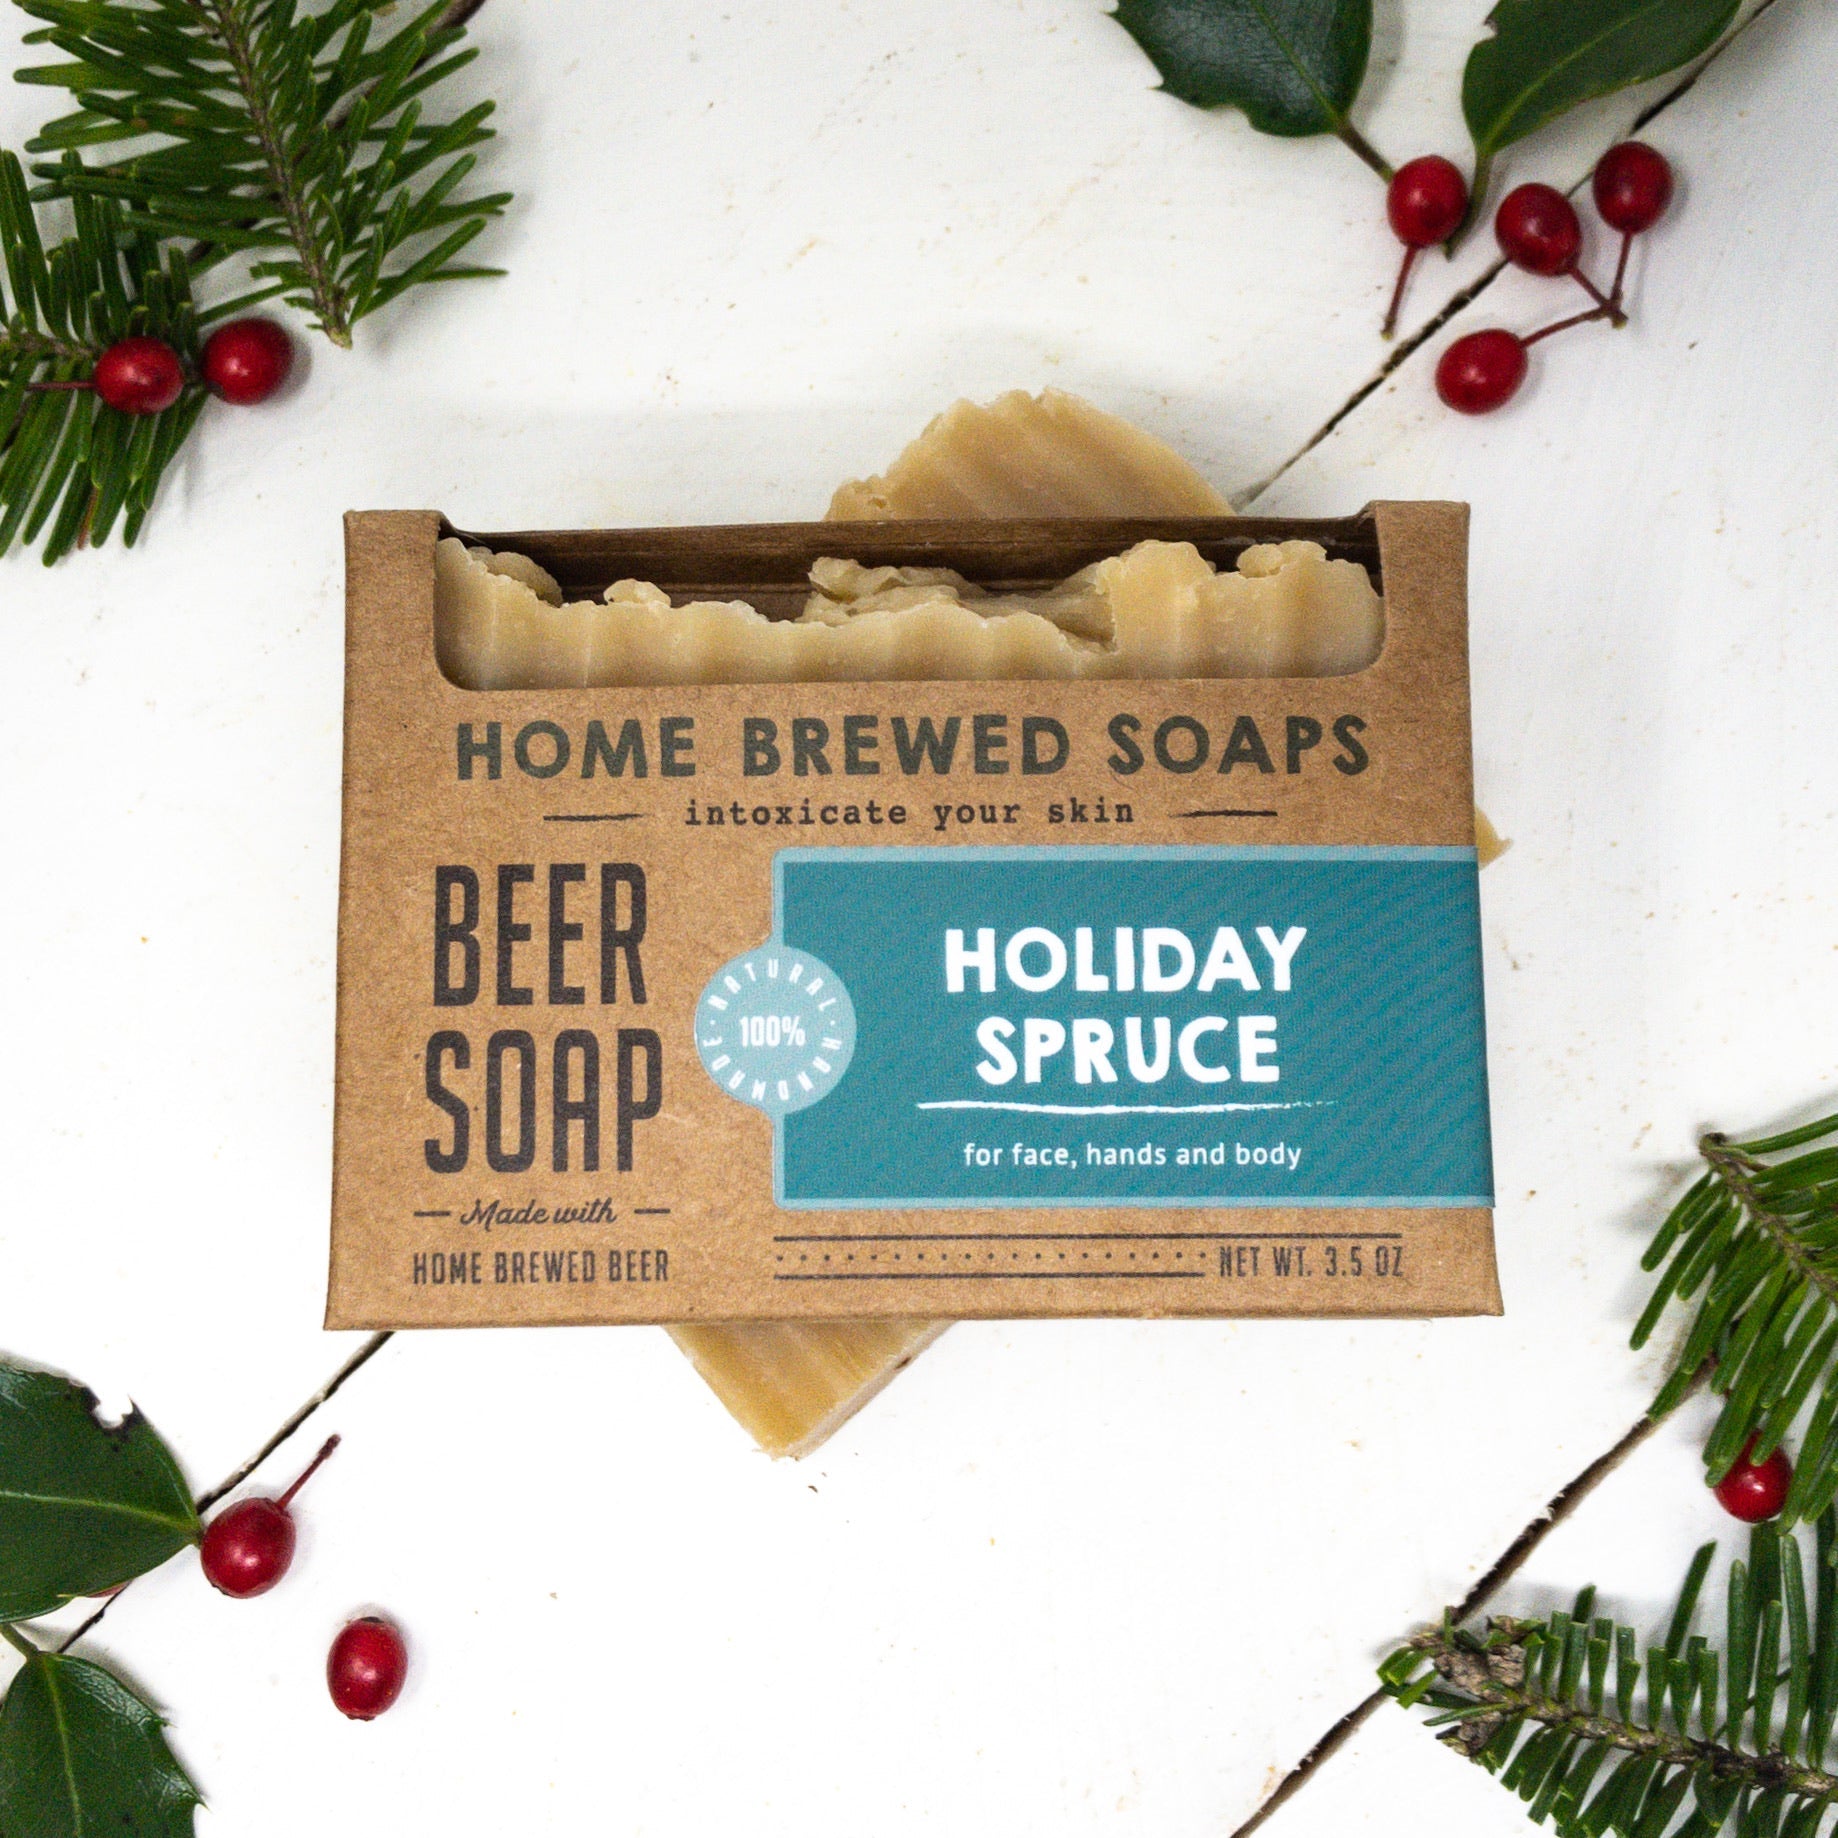 Holiday Spruce Beer Soap - Soap for Men by Home Brewed Soaps